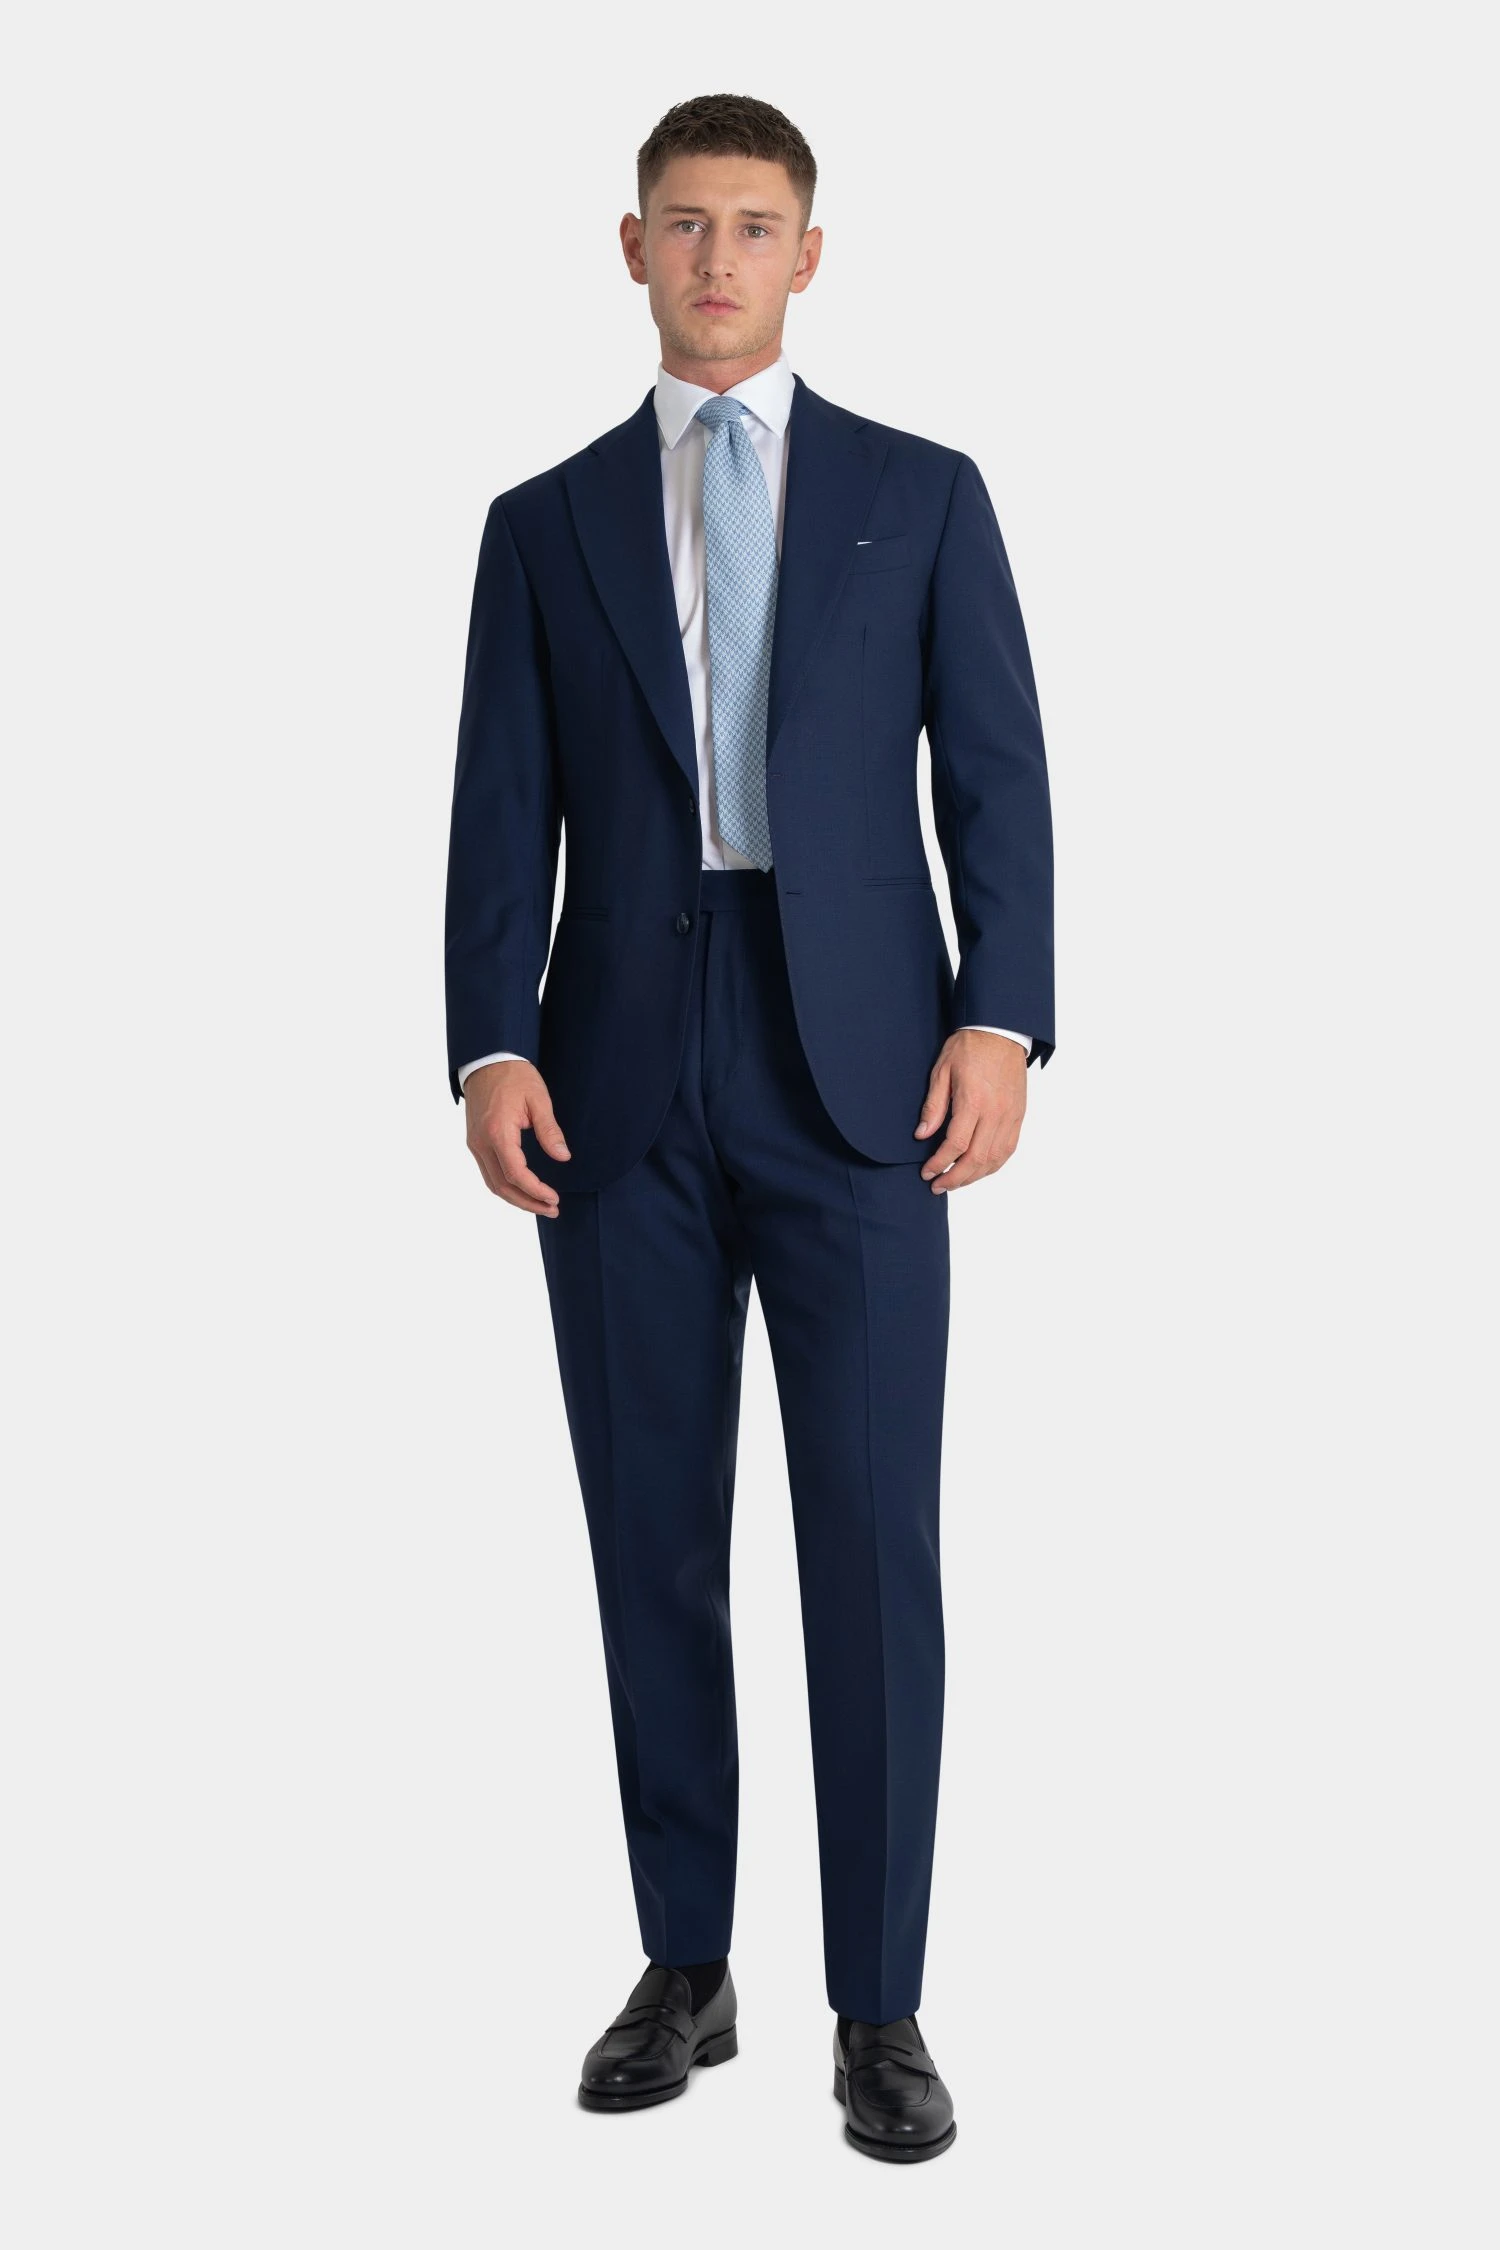 Navy melange suit in twistair fabric, made to measure tailored by Mond